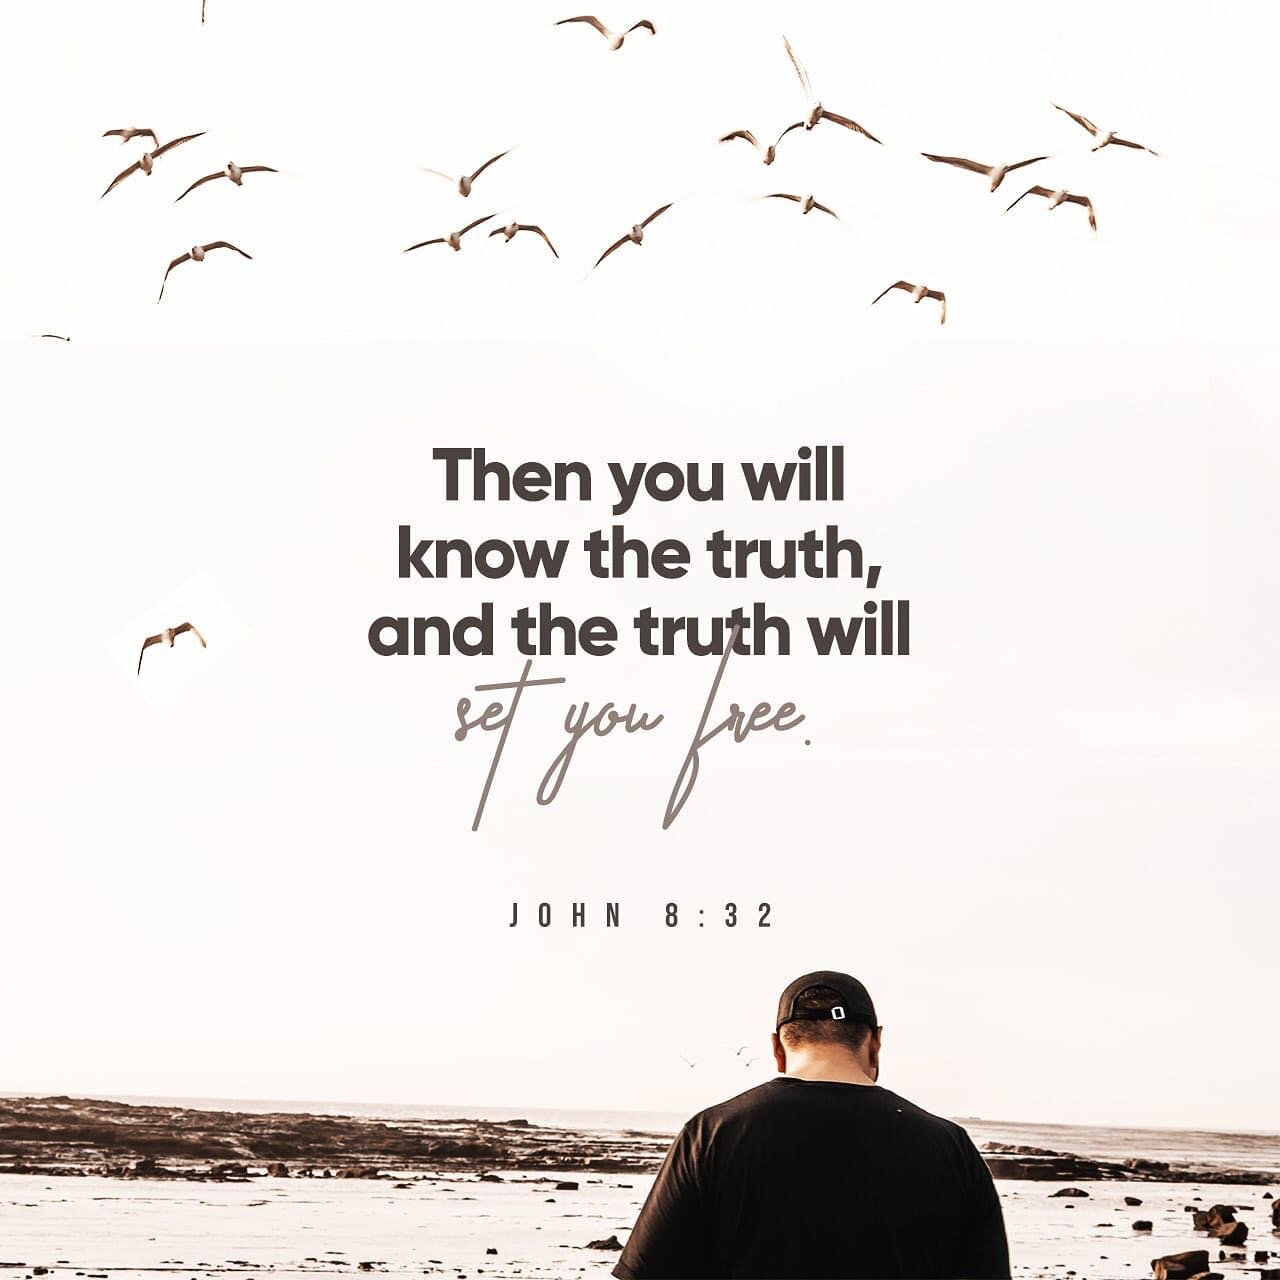 &ldquo;To the Jews who had believed him, Jesus said, &ldquo;If you hold to my teaching, you are really my disciples. Then you will know the truth, and the truth will set you free.&rdquo;&rdquo;
‭‭John‬ ‭8:31-32‬ ‭NIV‬‬

Join us tonight for our midwee